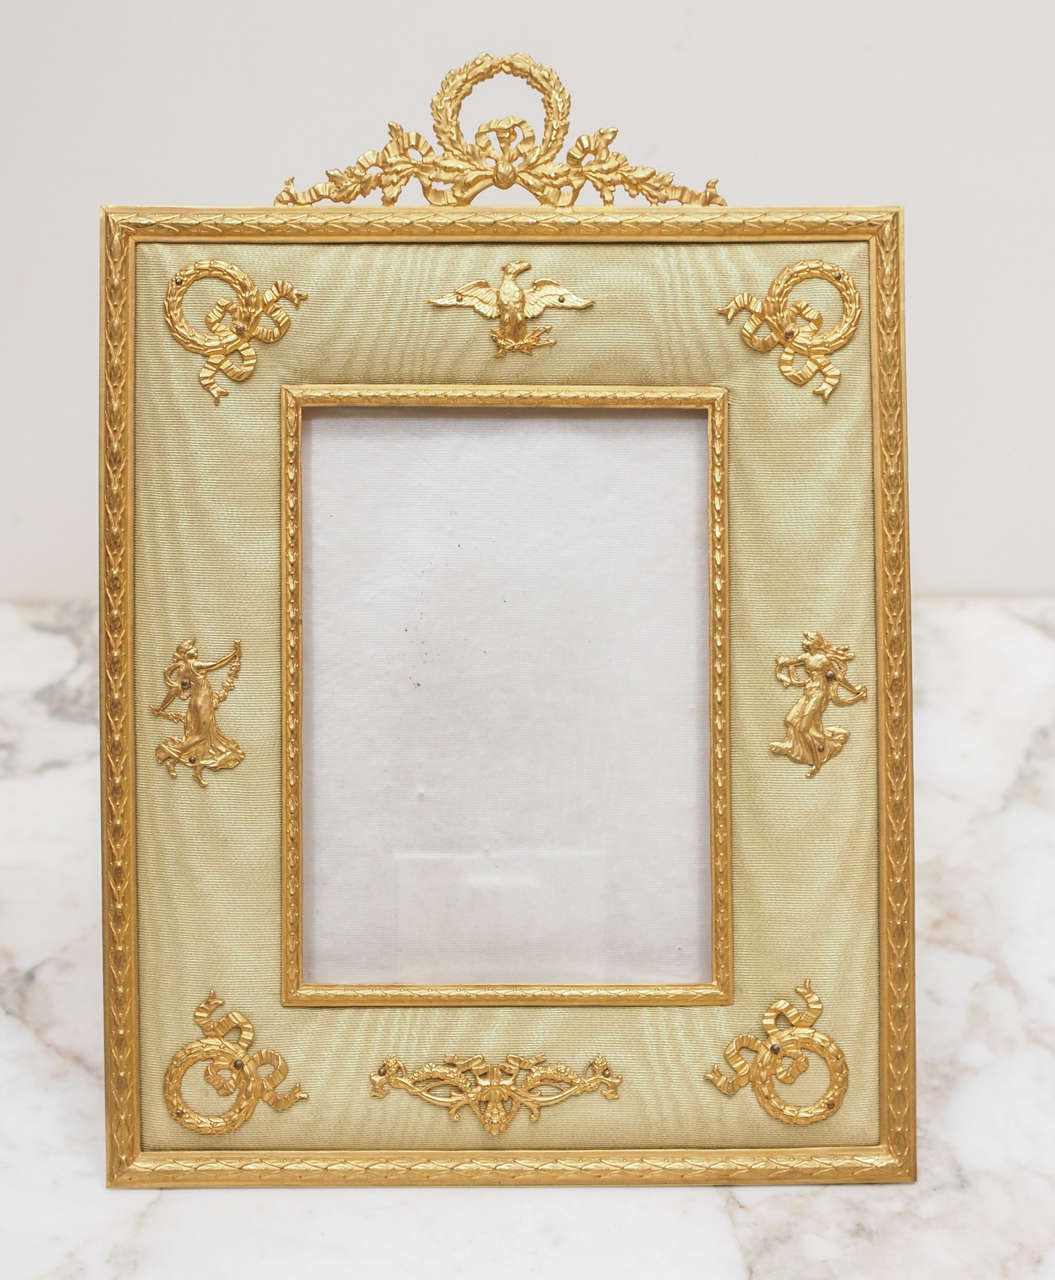 French Gilt Bronze Classically decorated frame applied to Moire Silk background.